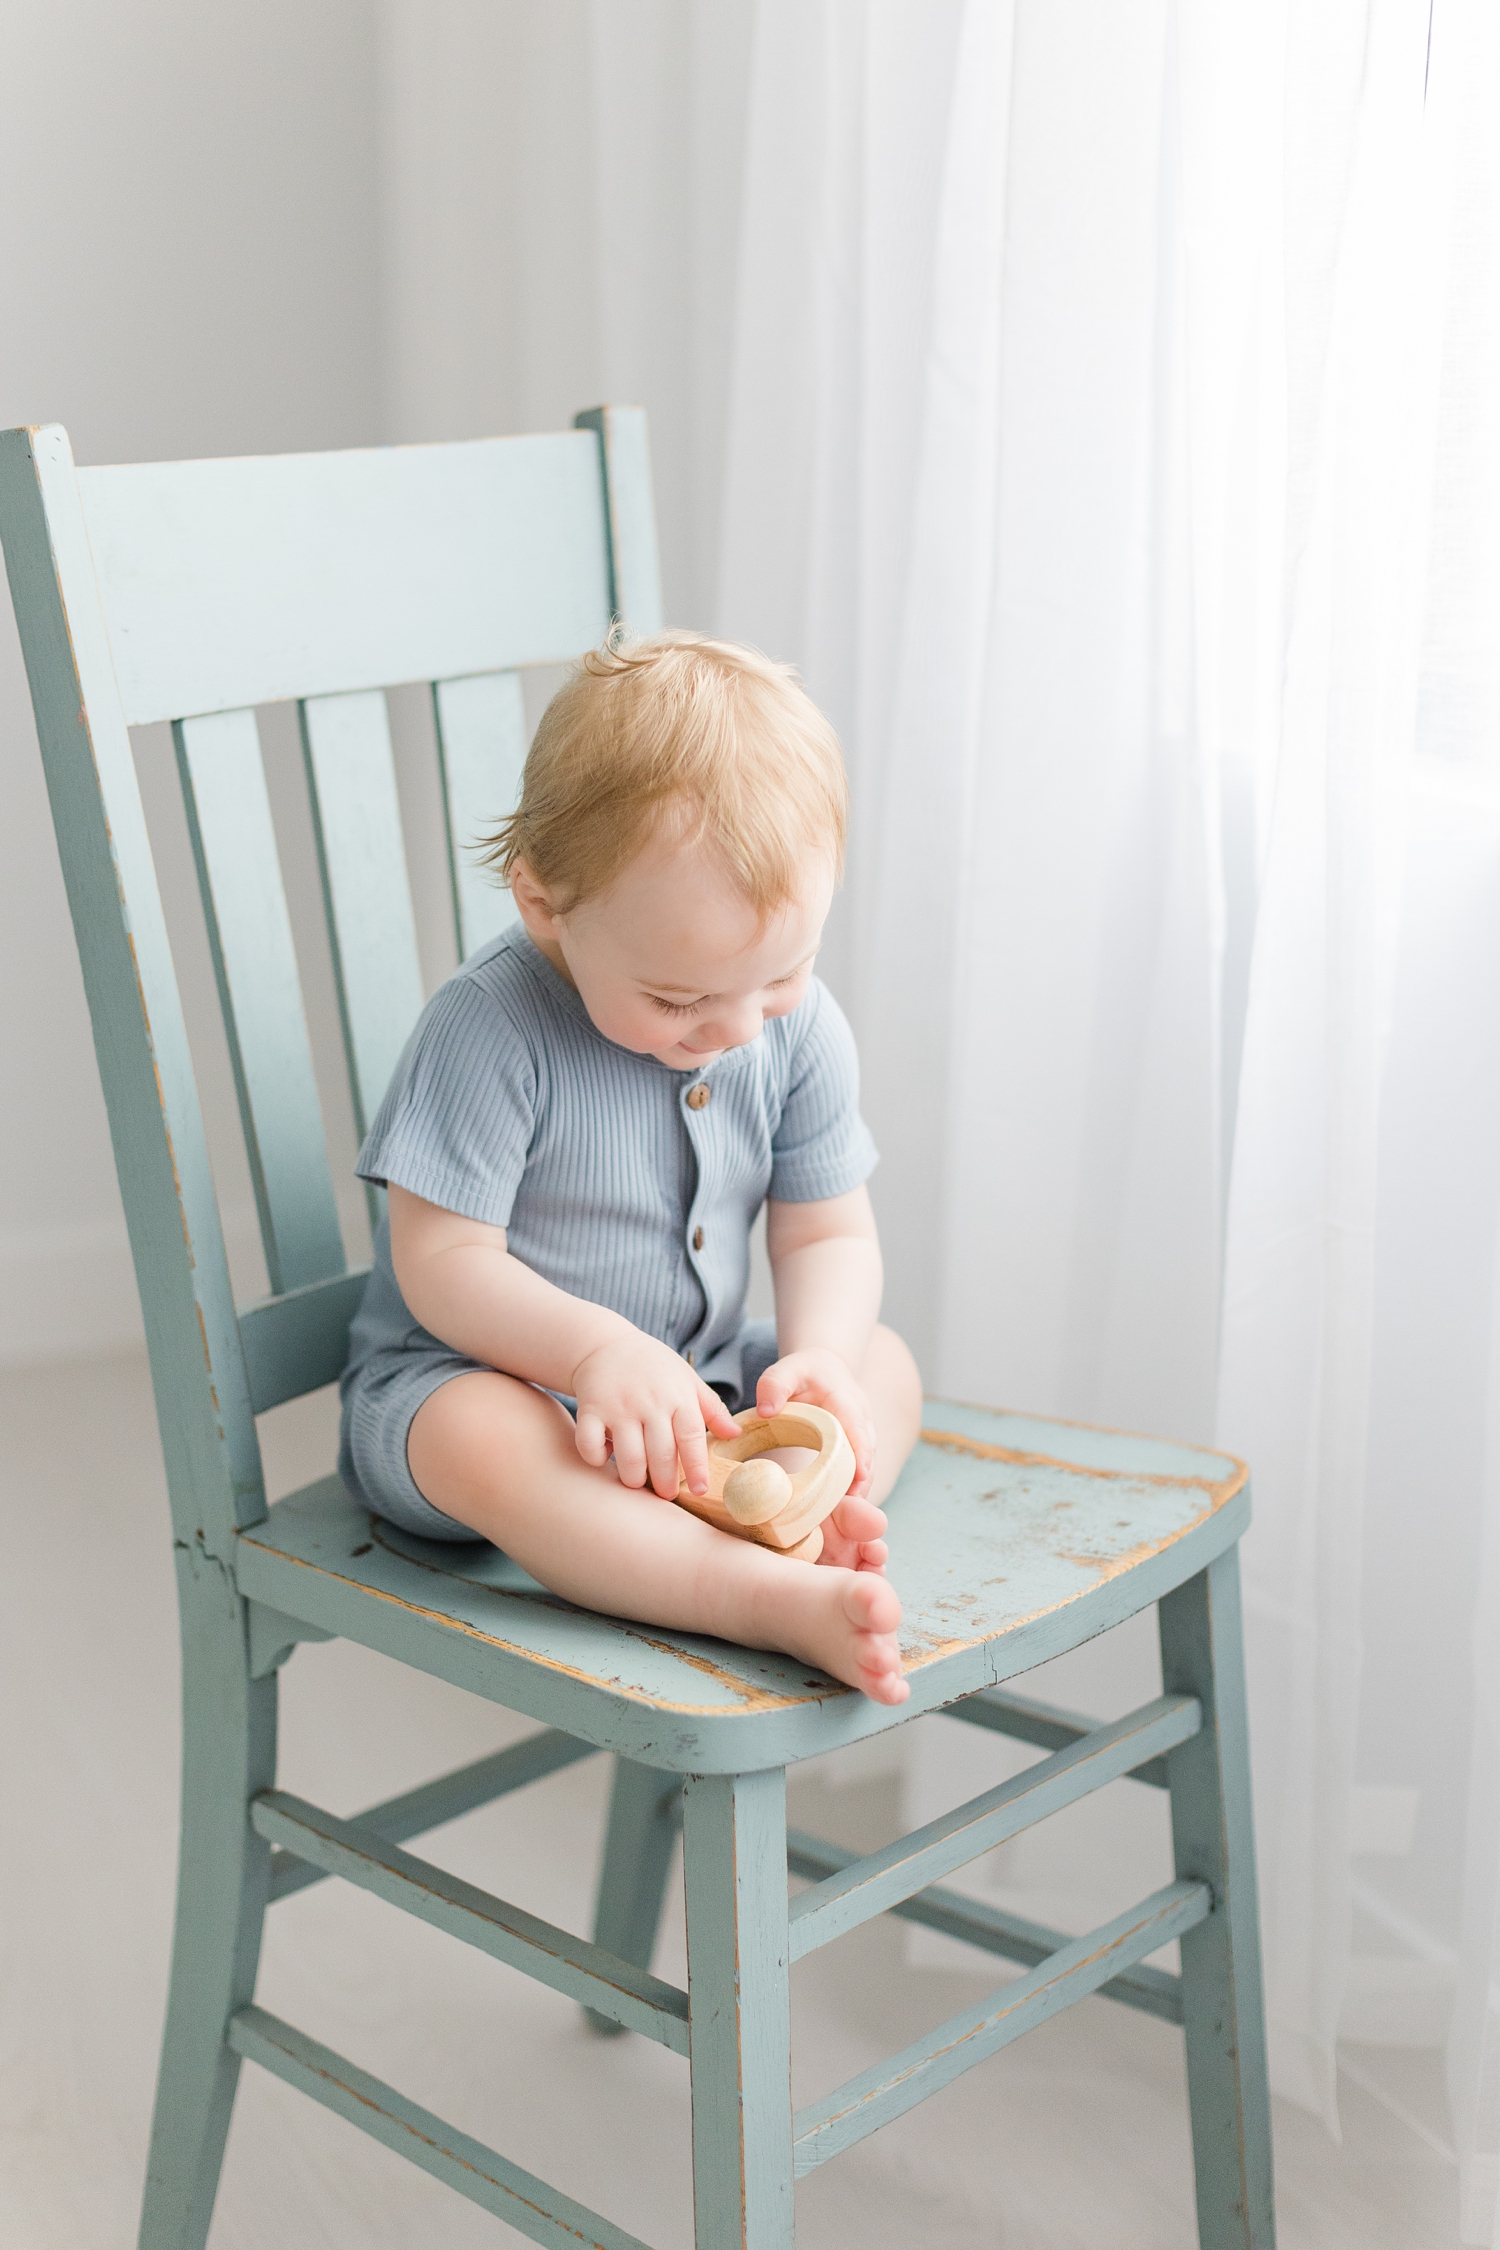 Baby Lewis sits on a blue chair in a white room full of draping white curtains while playing with wooden cars | CB Studio